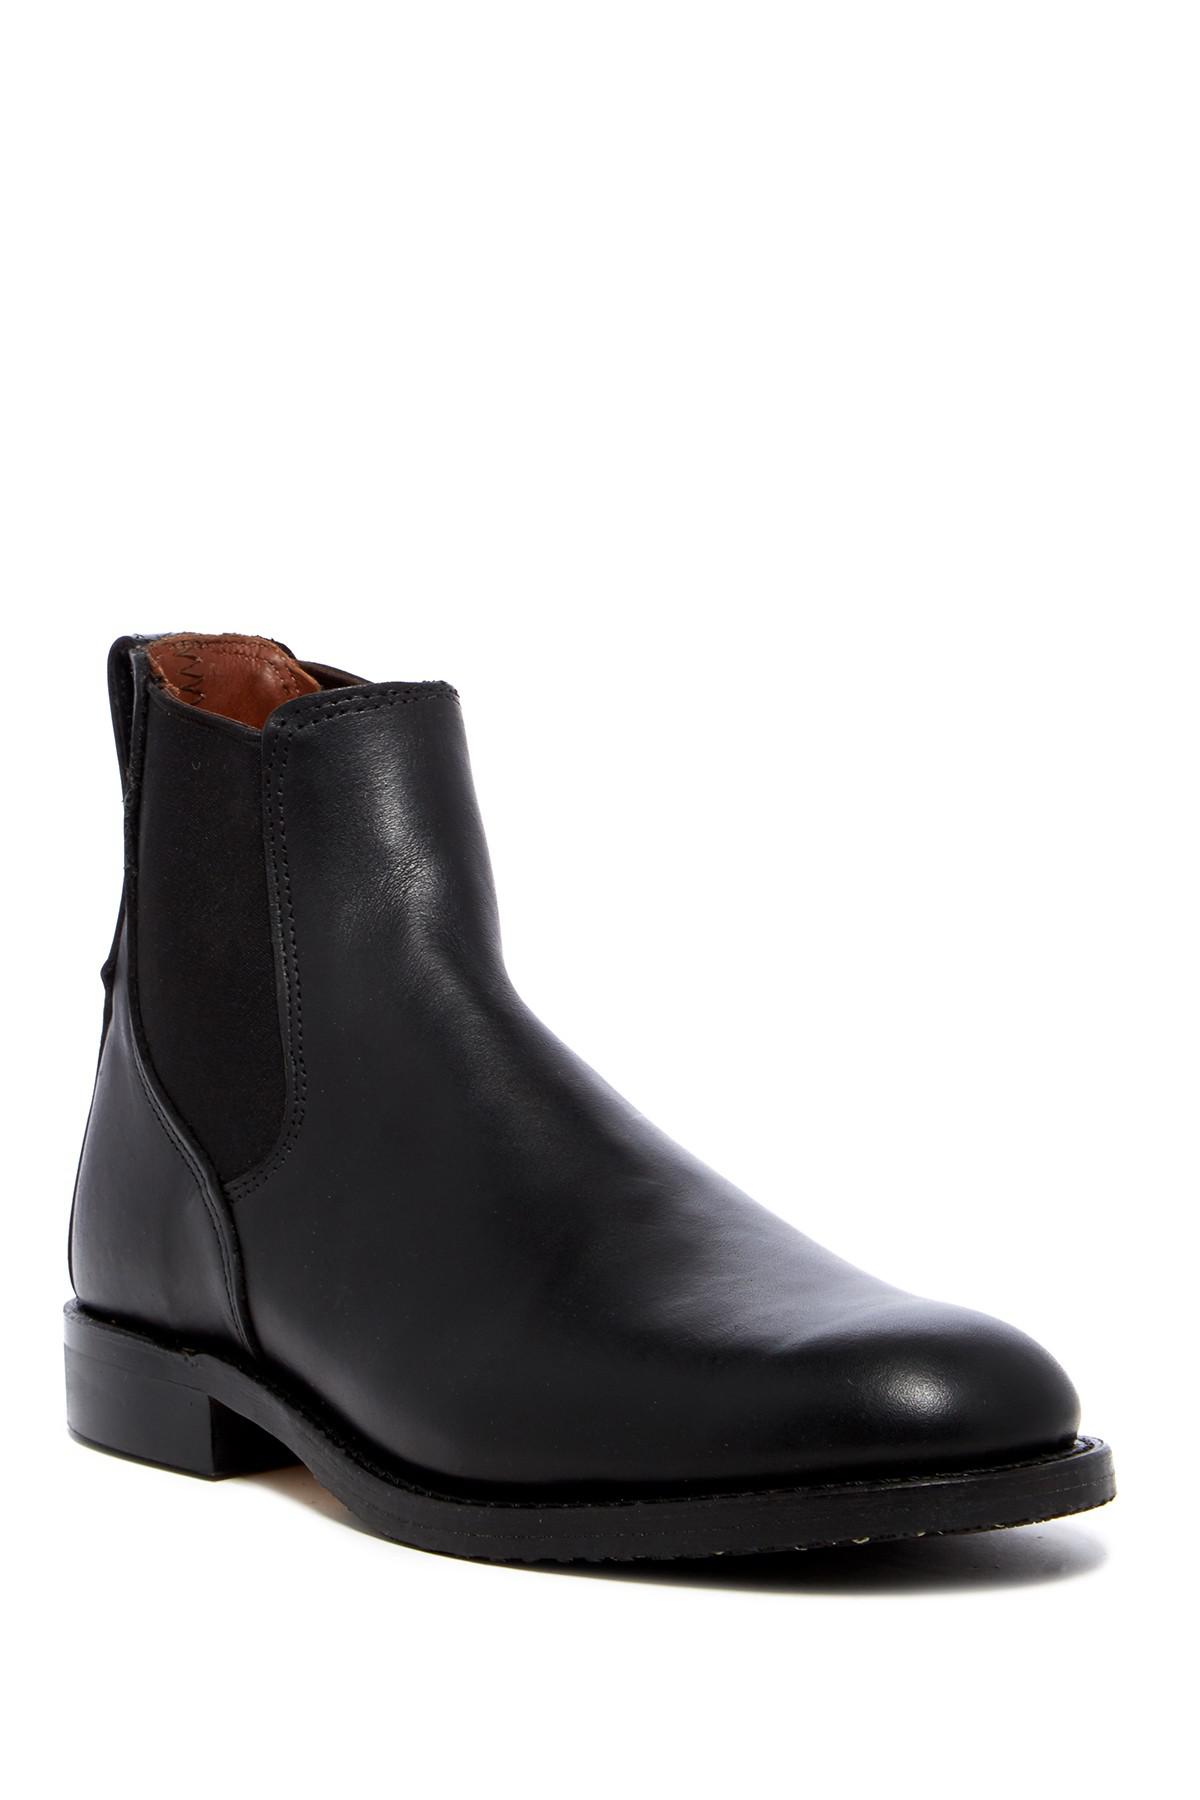 red wing black chelsea boots